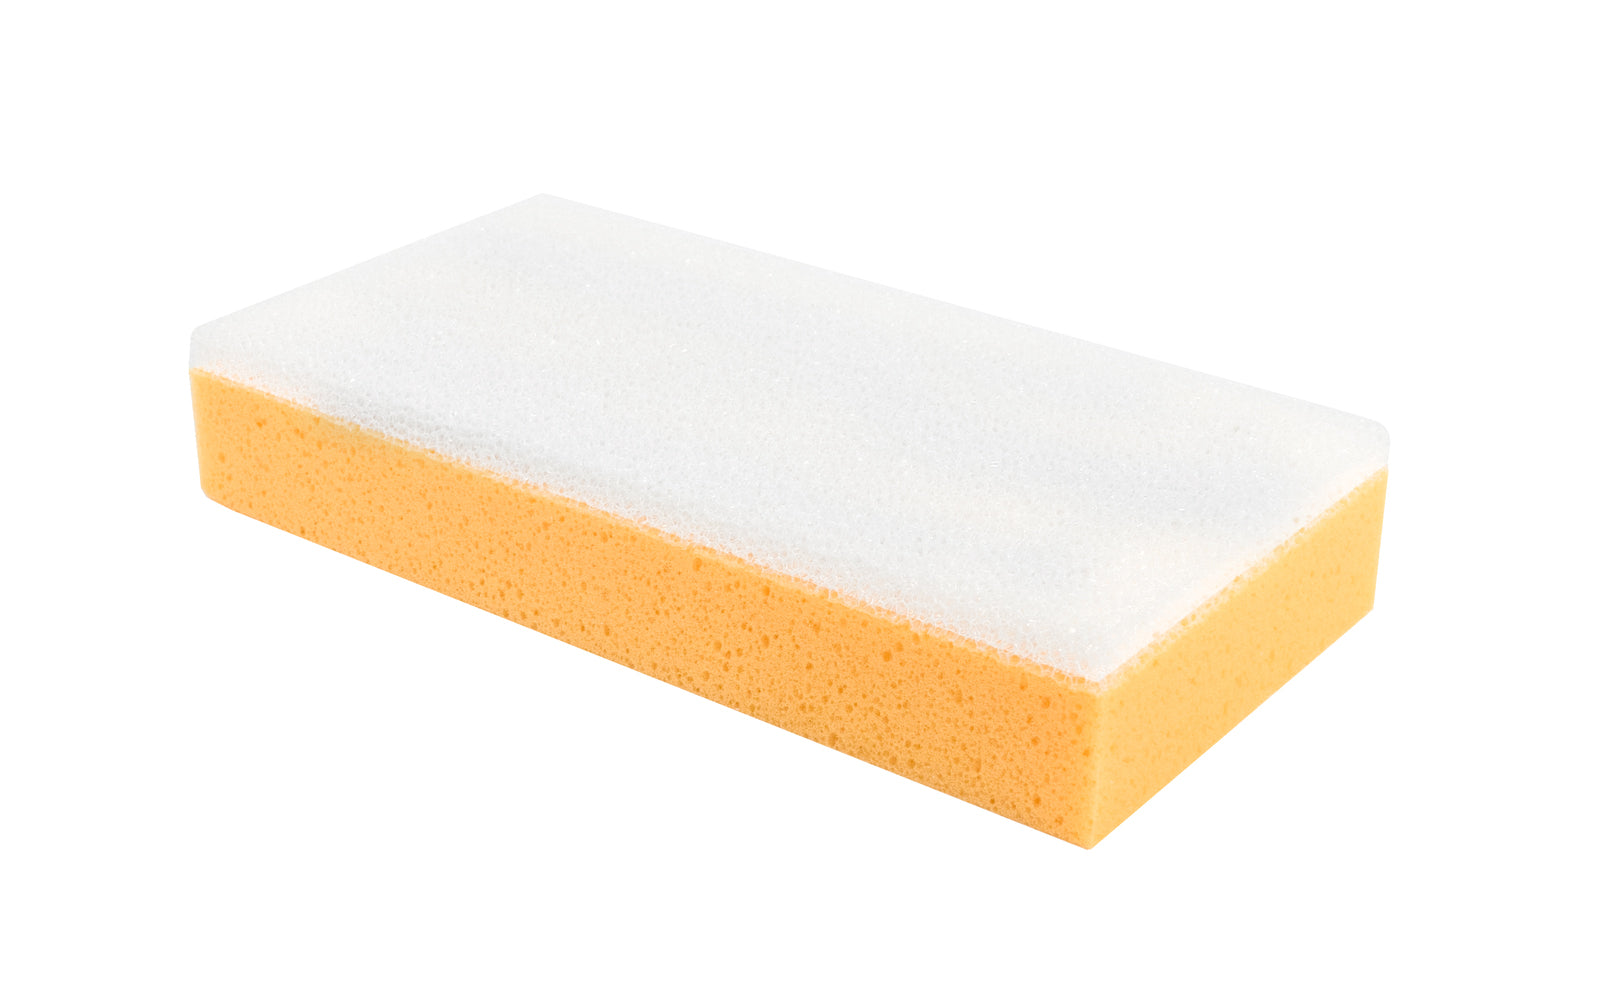 This contractor-grade QLT Drywall Sanding Sponge is the only sponge that you will ever need for your drywall projects. The abrasive side of the sponge is perfect for wet sanding, while the soft sponge side is used for removing residue, leaving you with a virtually dustless sanding experience. 035965064675. Model DWS467